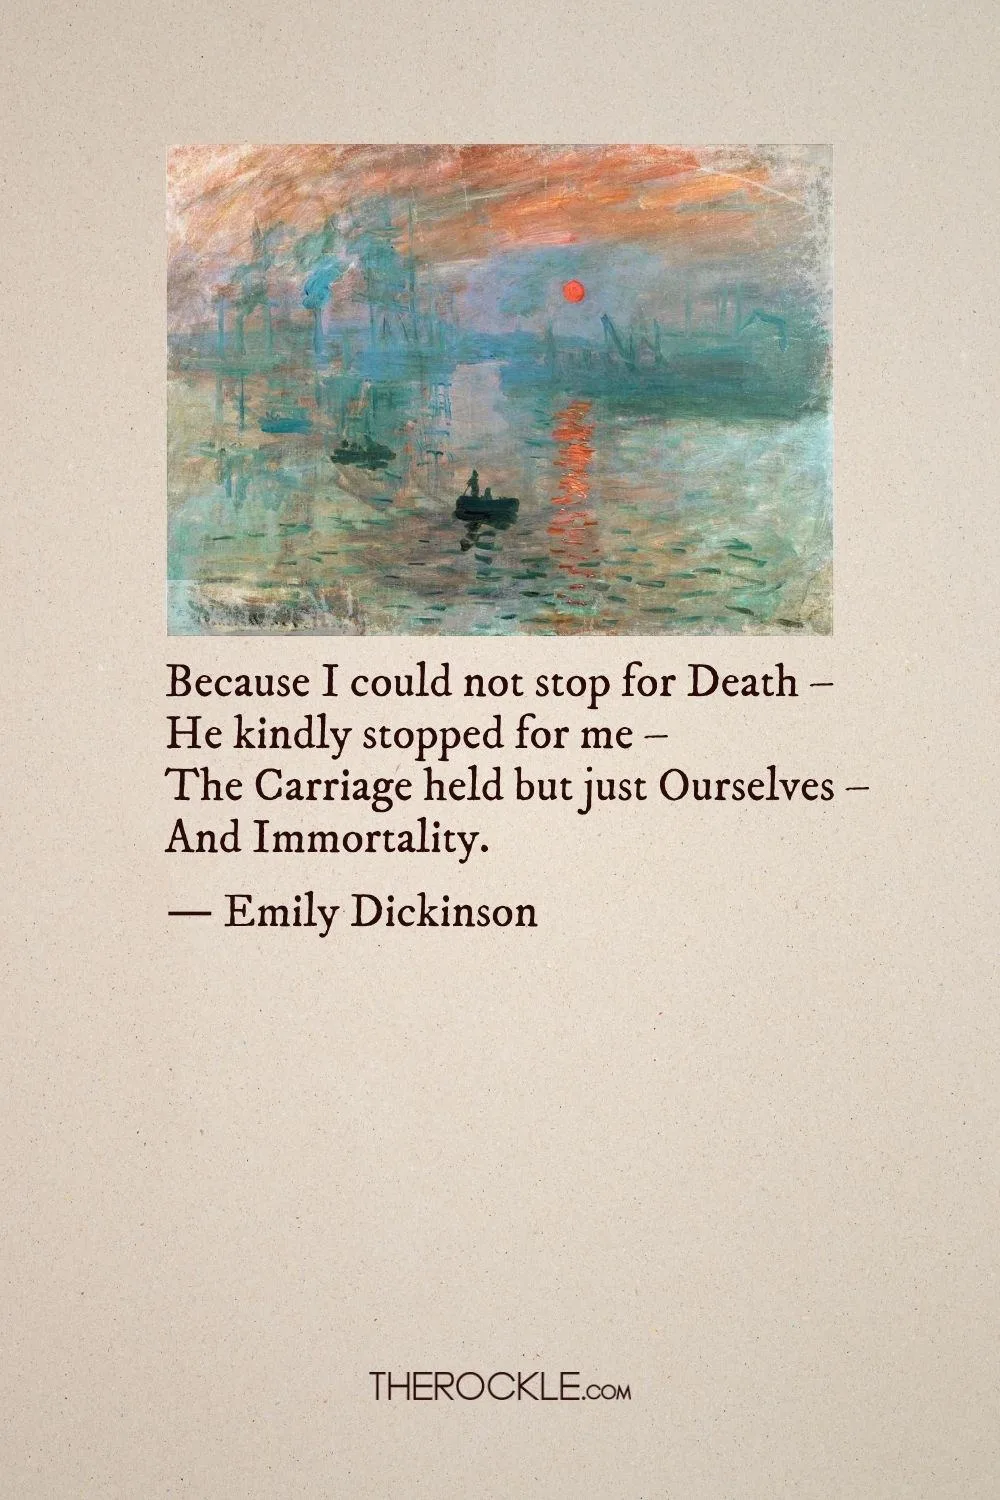 Emily Dickinson's quote about death